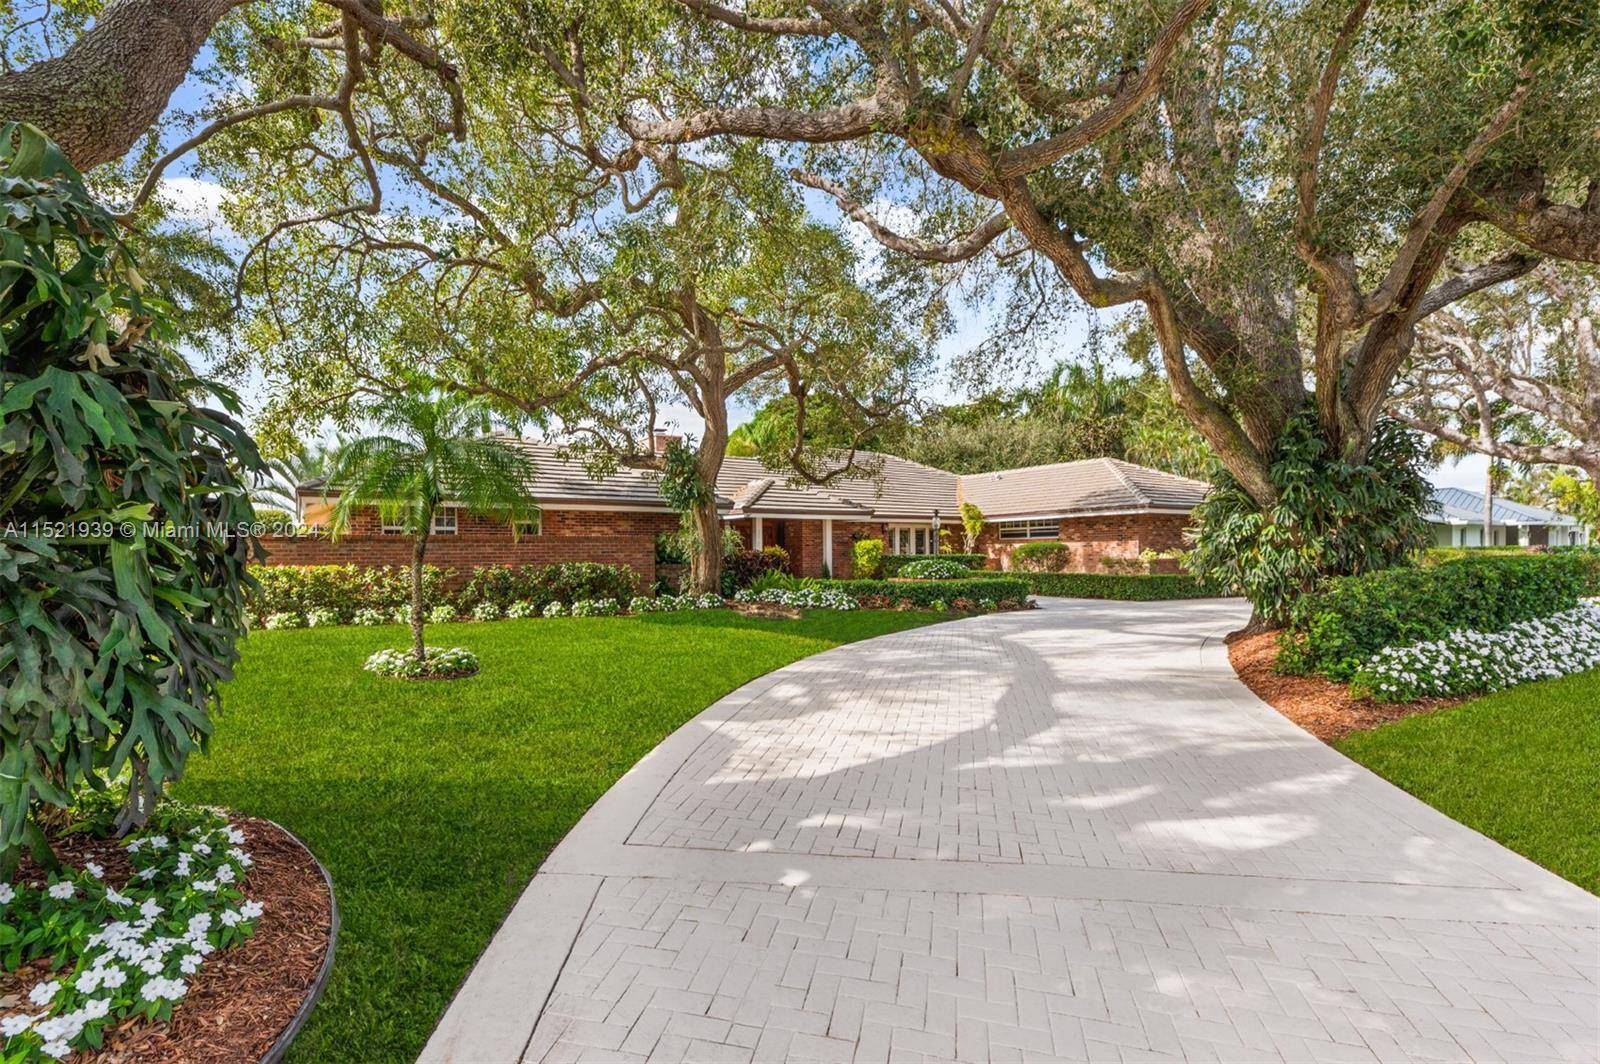 Beautifully appointed waterfront home on the desirable Delray Boynton line and over 150 feet of water frontage.